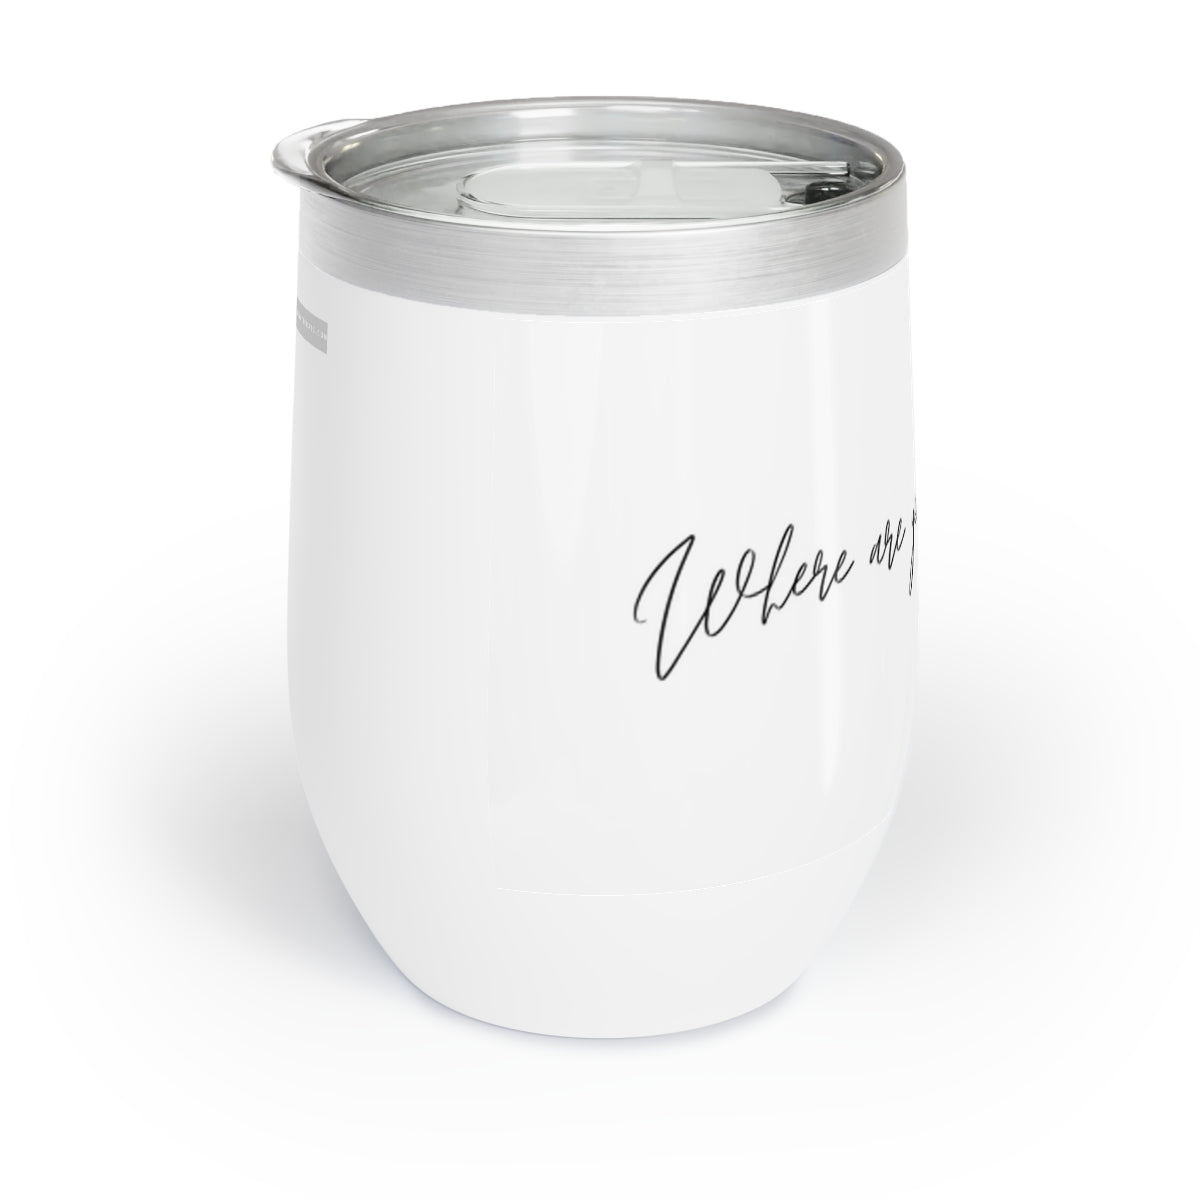 Where Are You Going in That? Chill Wine Tumbler